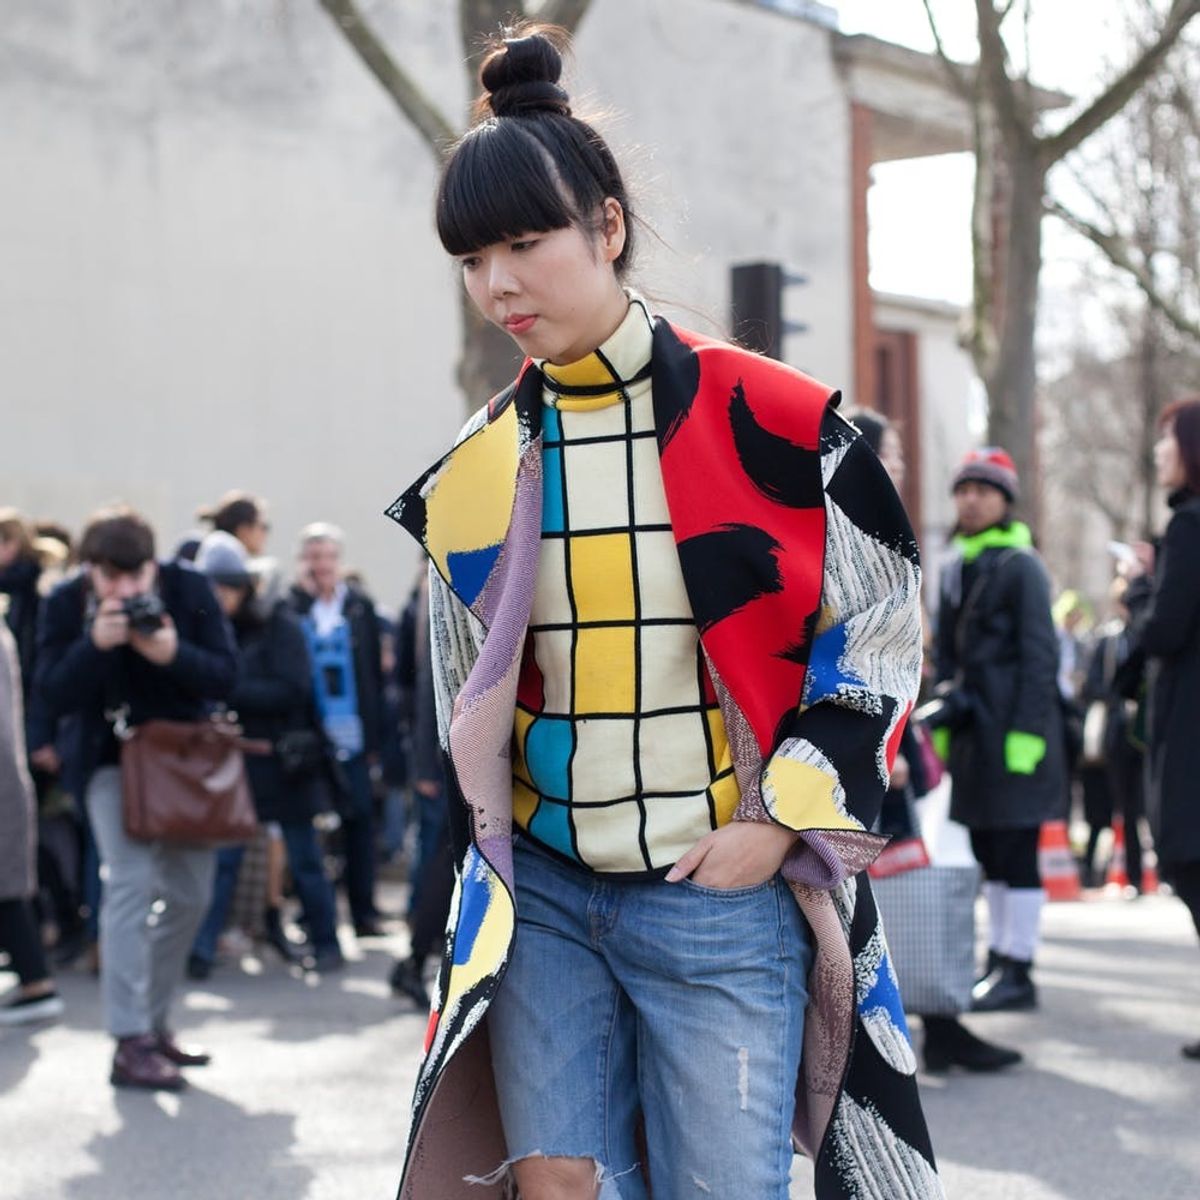 How to Embrace Fashion’s Maximalism Trend, According to Susie Bubble